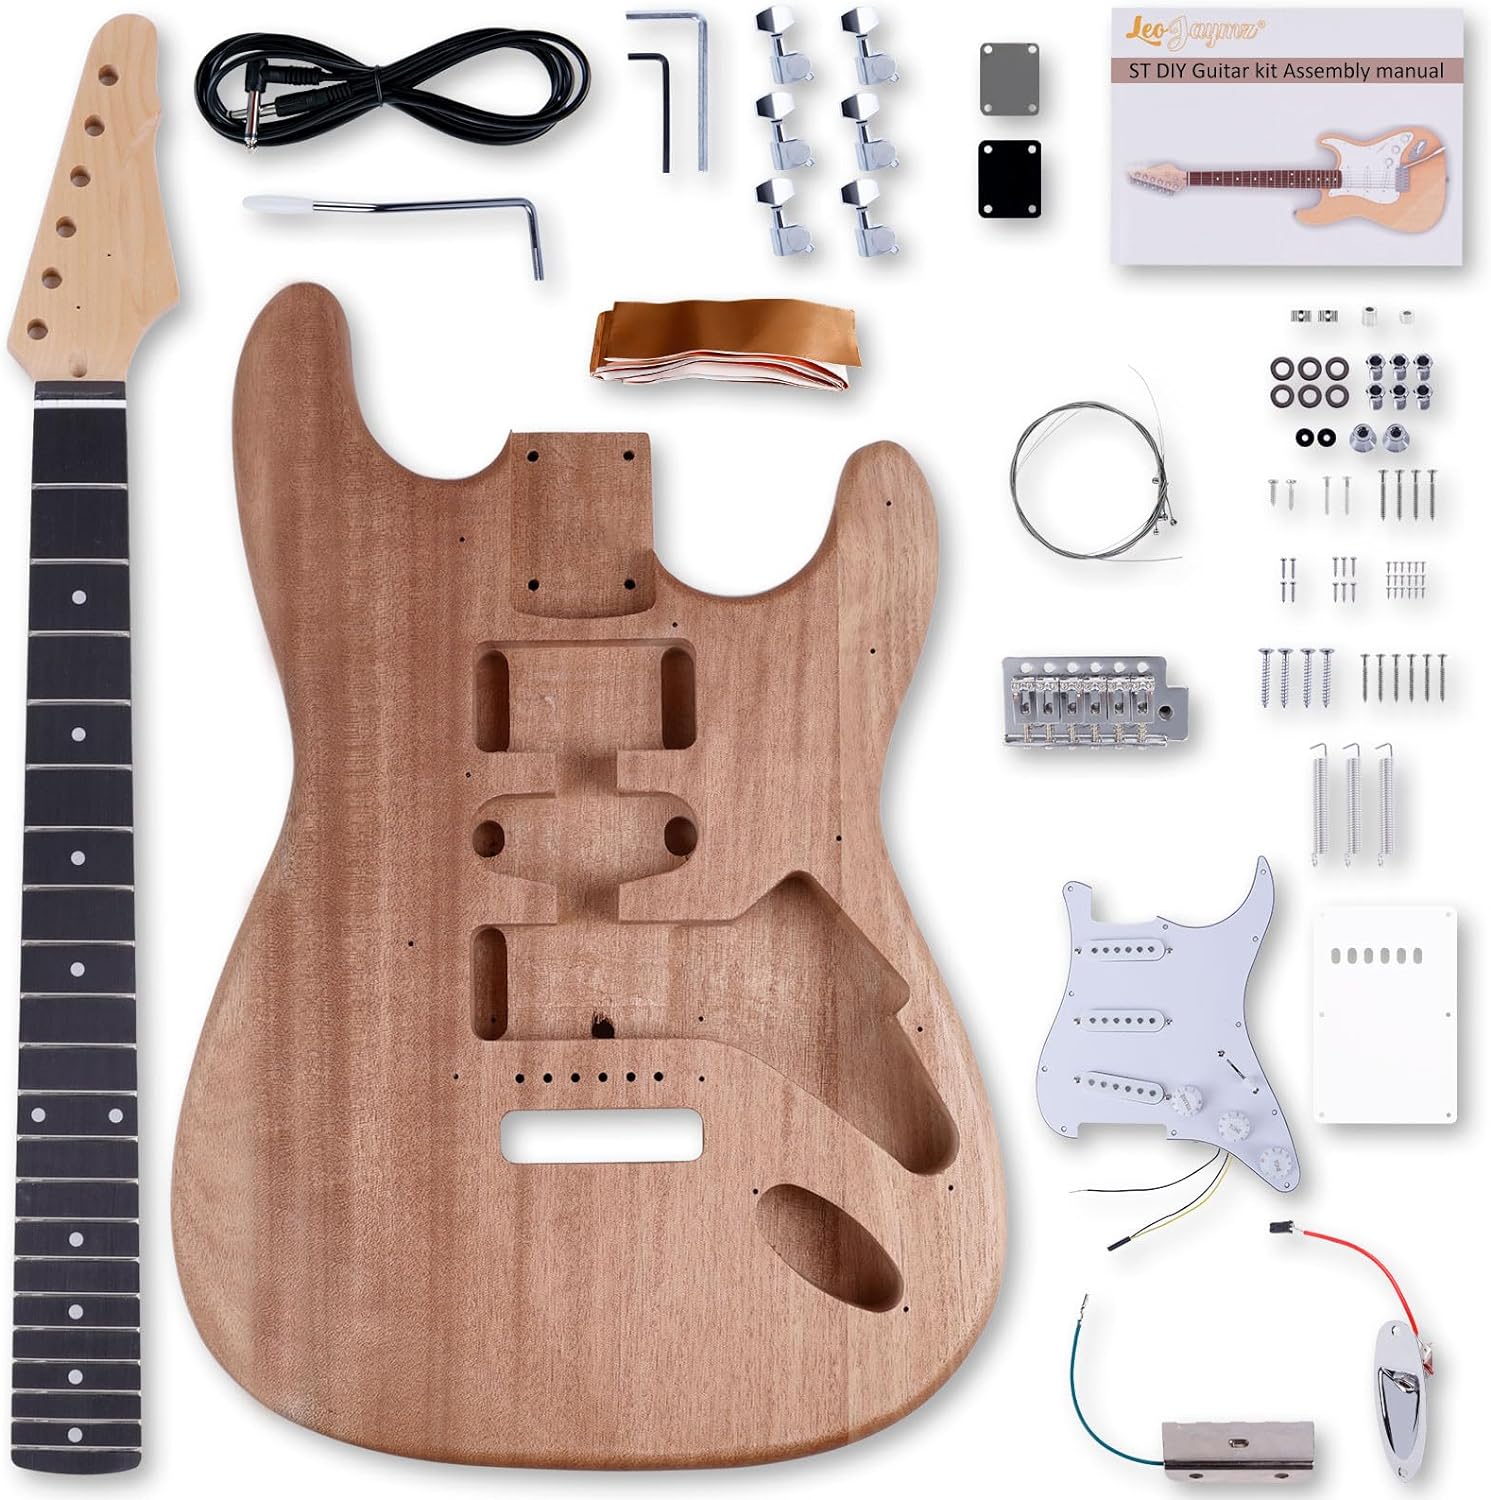 Leo Jaymz DIY ST Style Electric Guitar Kits with Mahogany Body and Maple Neck - Rosewood Fingerboard and All Components Included - image 1 of 6